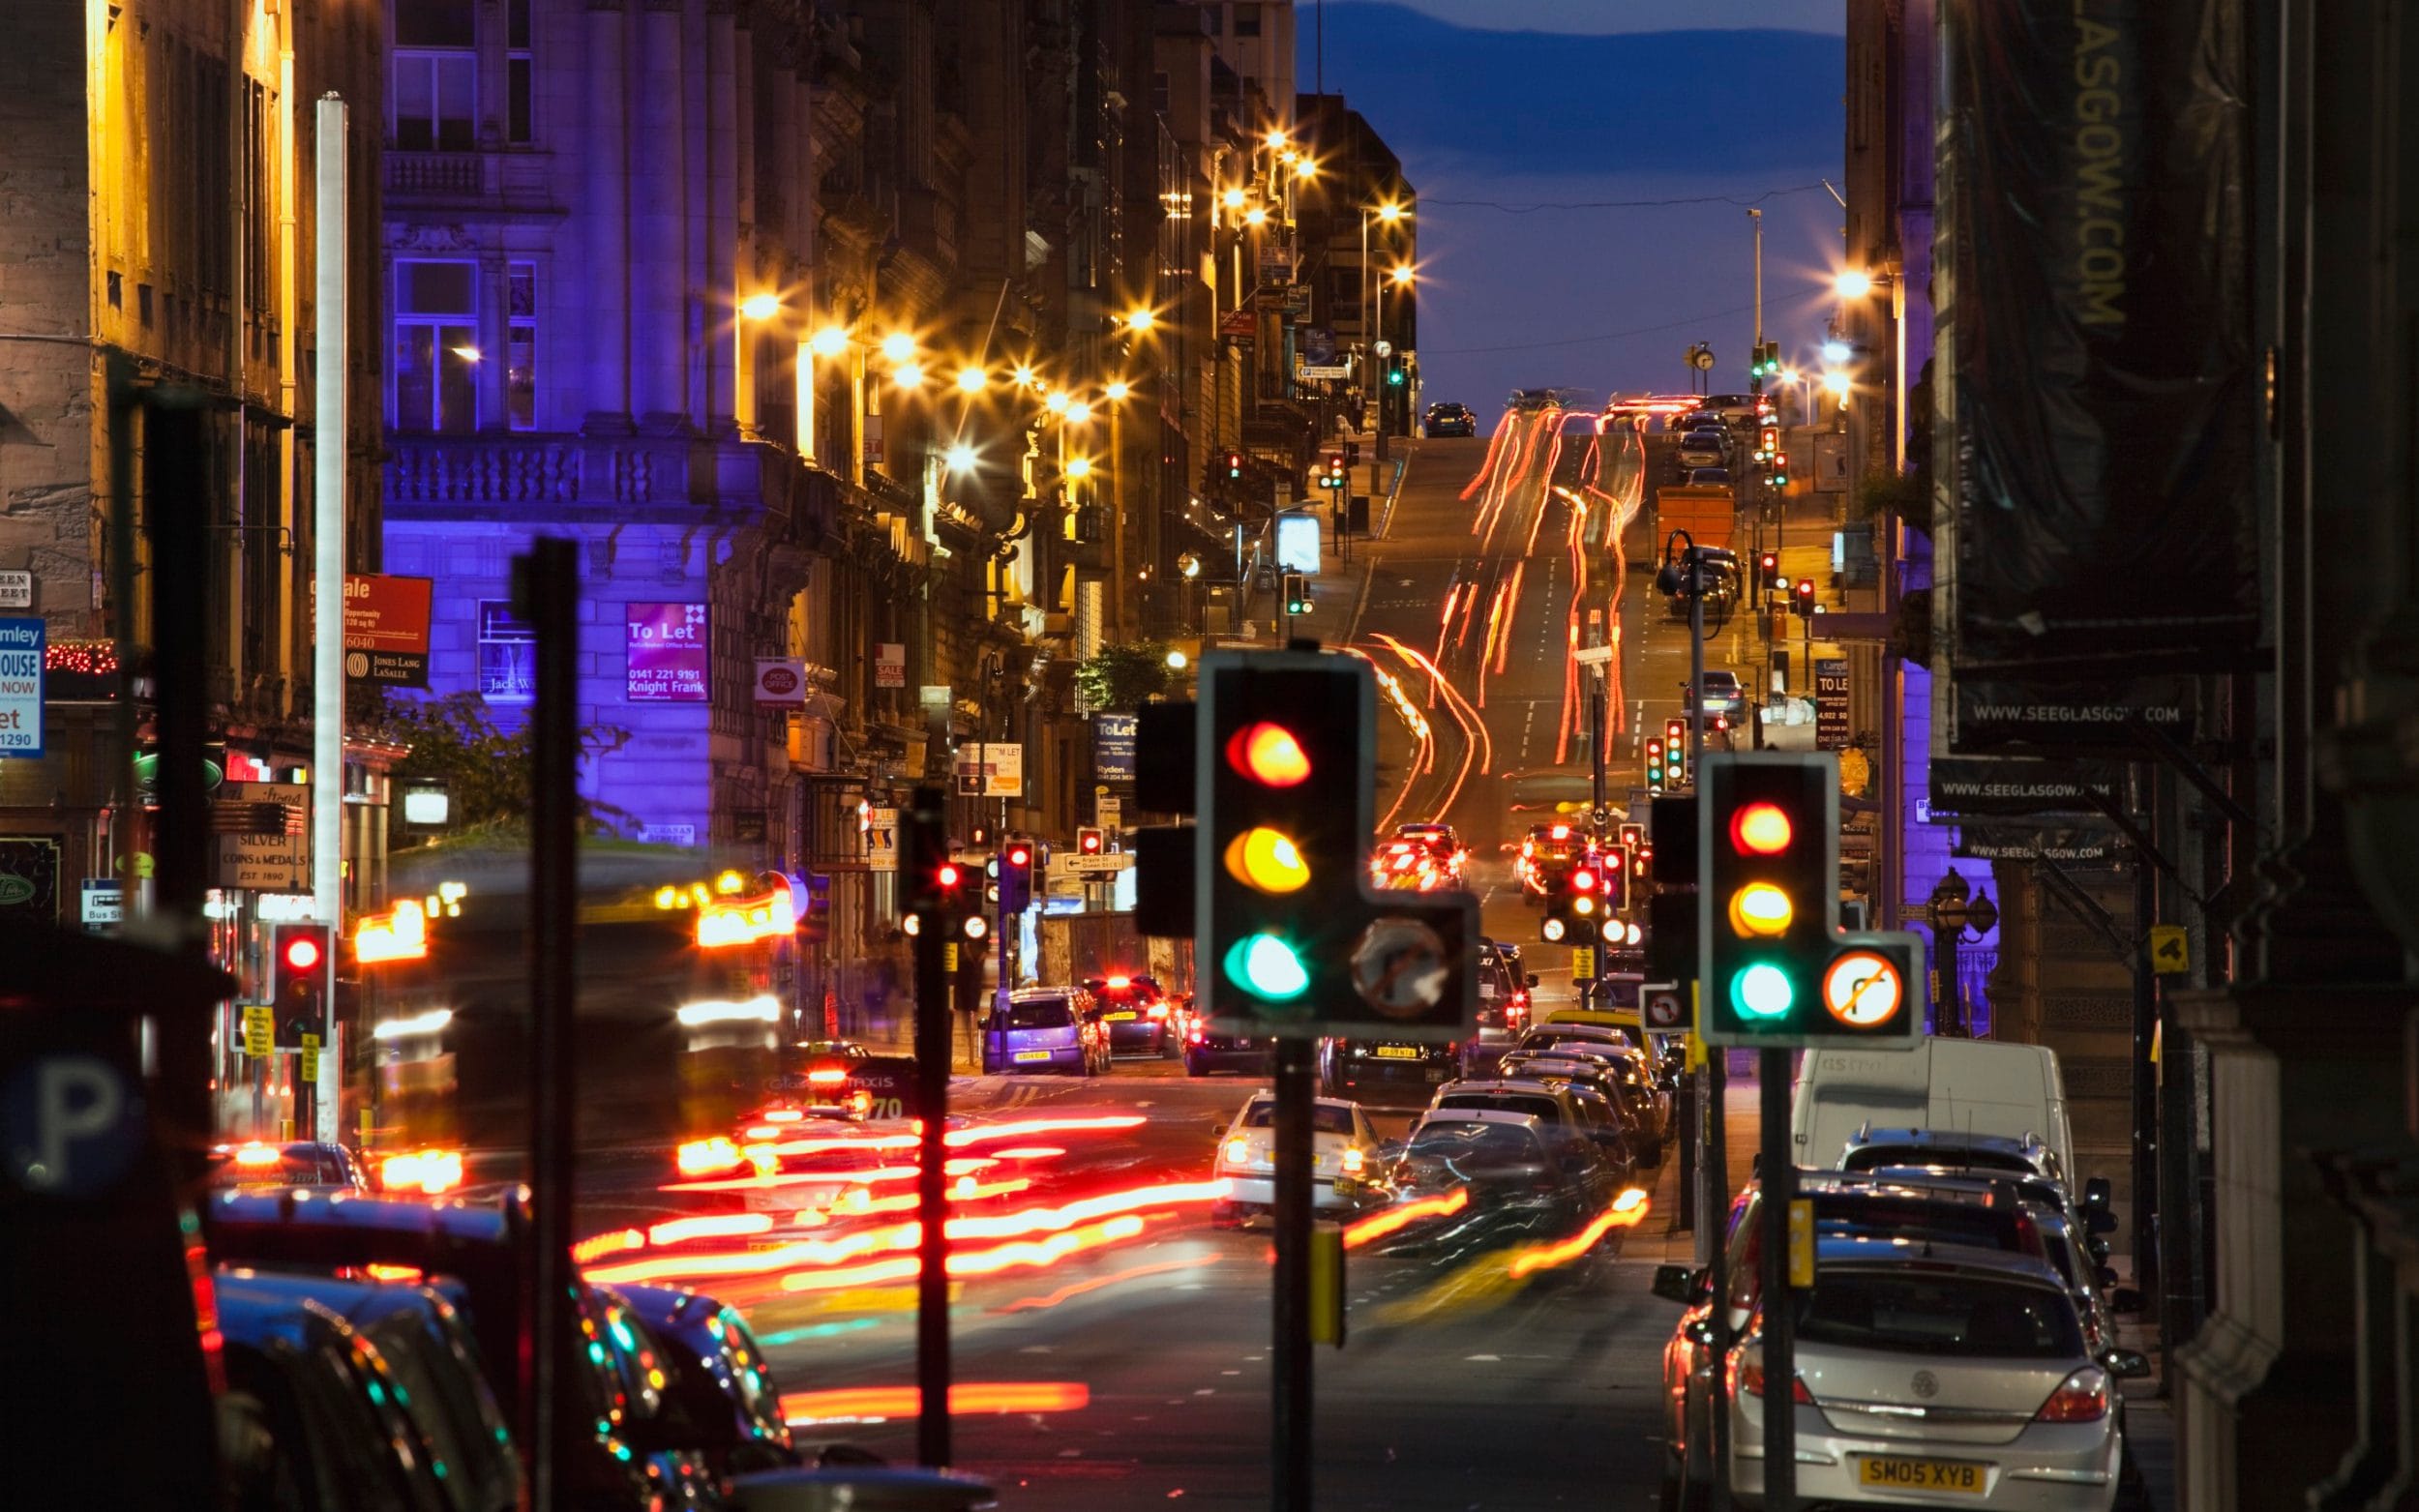 glasgow to impose 20mph speed limits